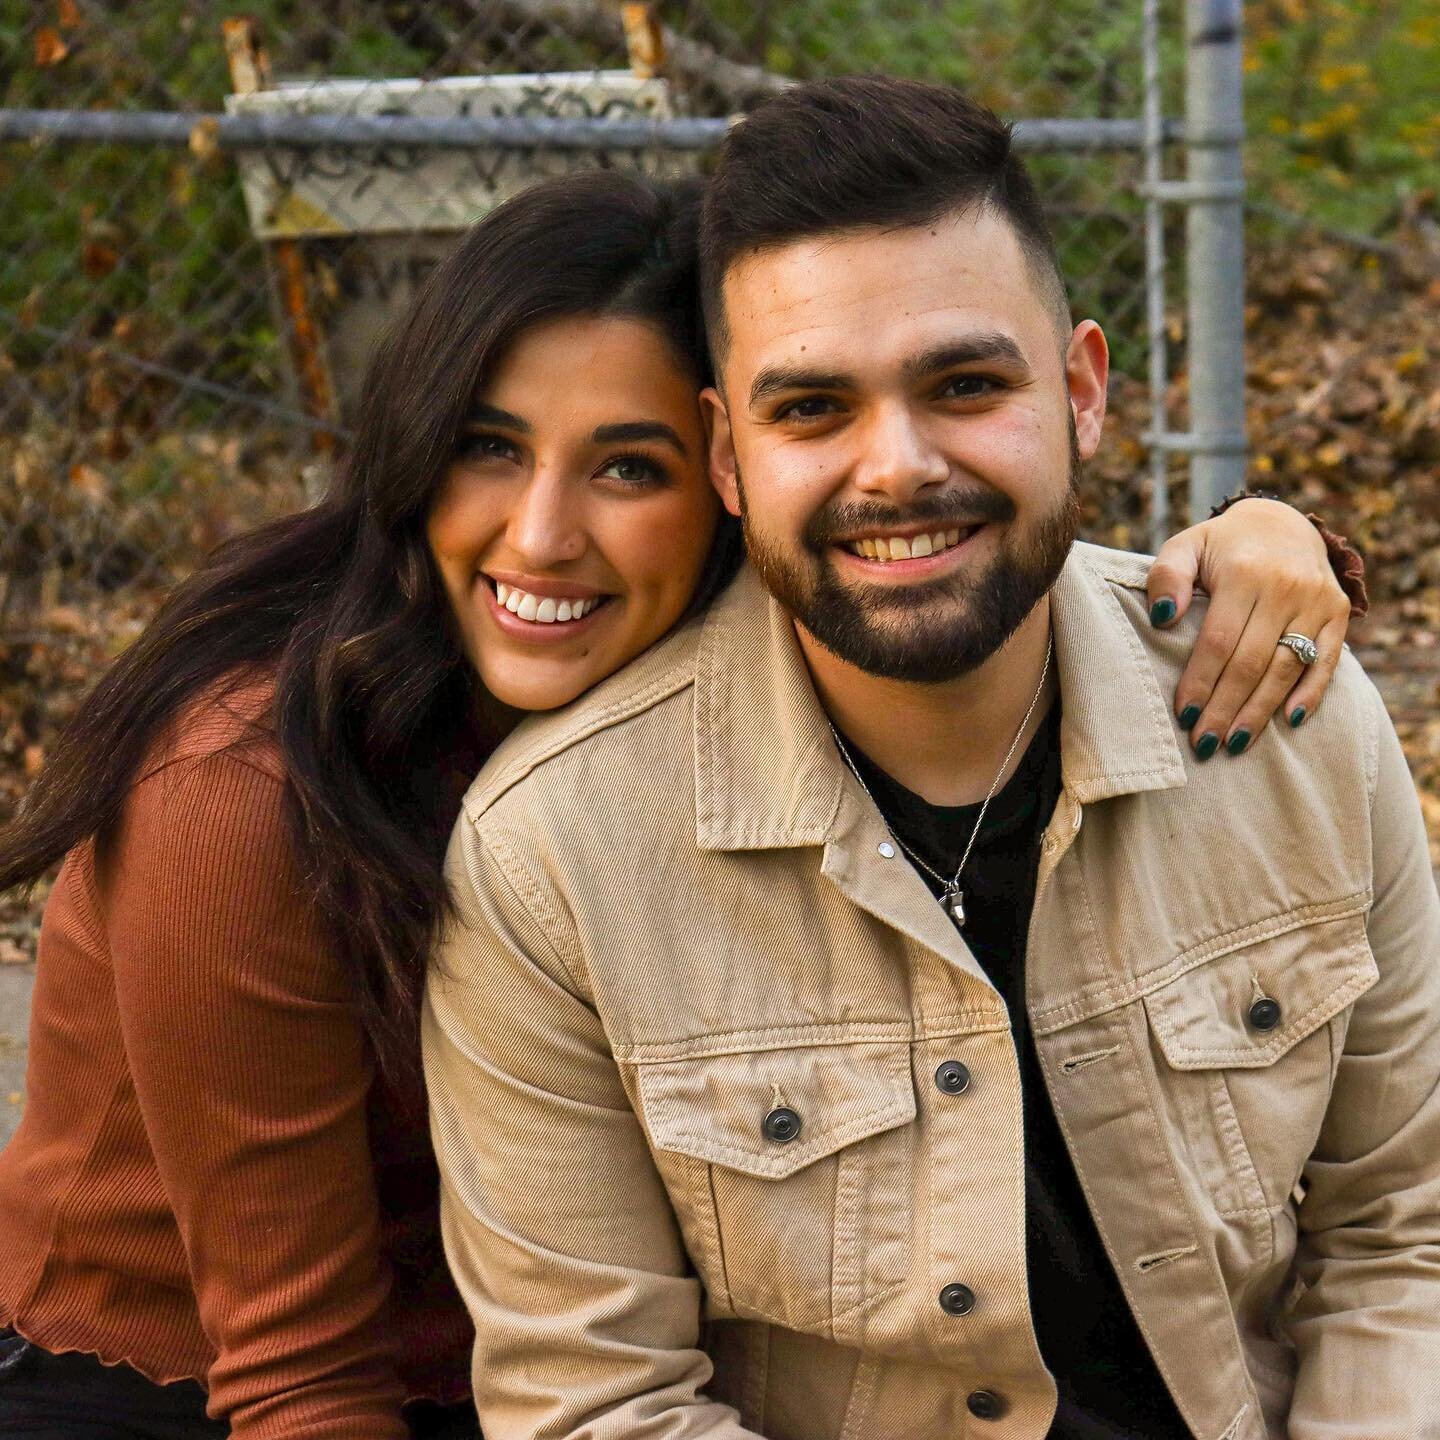 It&rsquo;s official!! Pastor G is in the house!! 🙌🙌🙌

Help us welcome our new Youth Pastor, Gerardo and Andrea Macias. 👏

Here are some fun facts about our new Youth Pastor:

- Gerardo is from Dallas, Texas and Andrea is from Tegucigalpa, Hondura